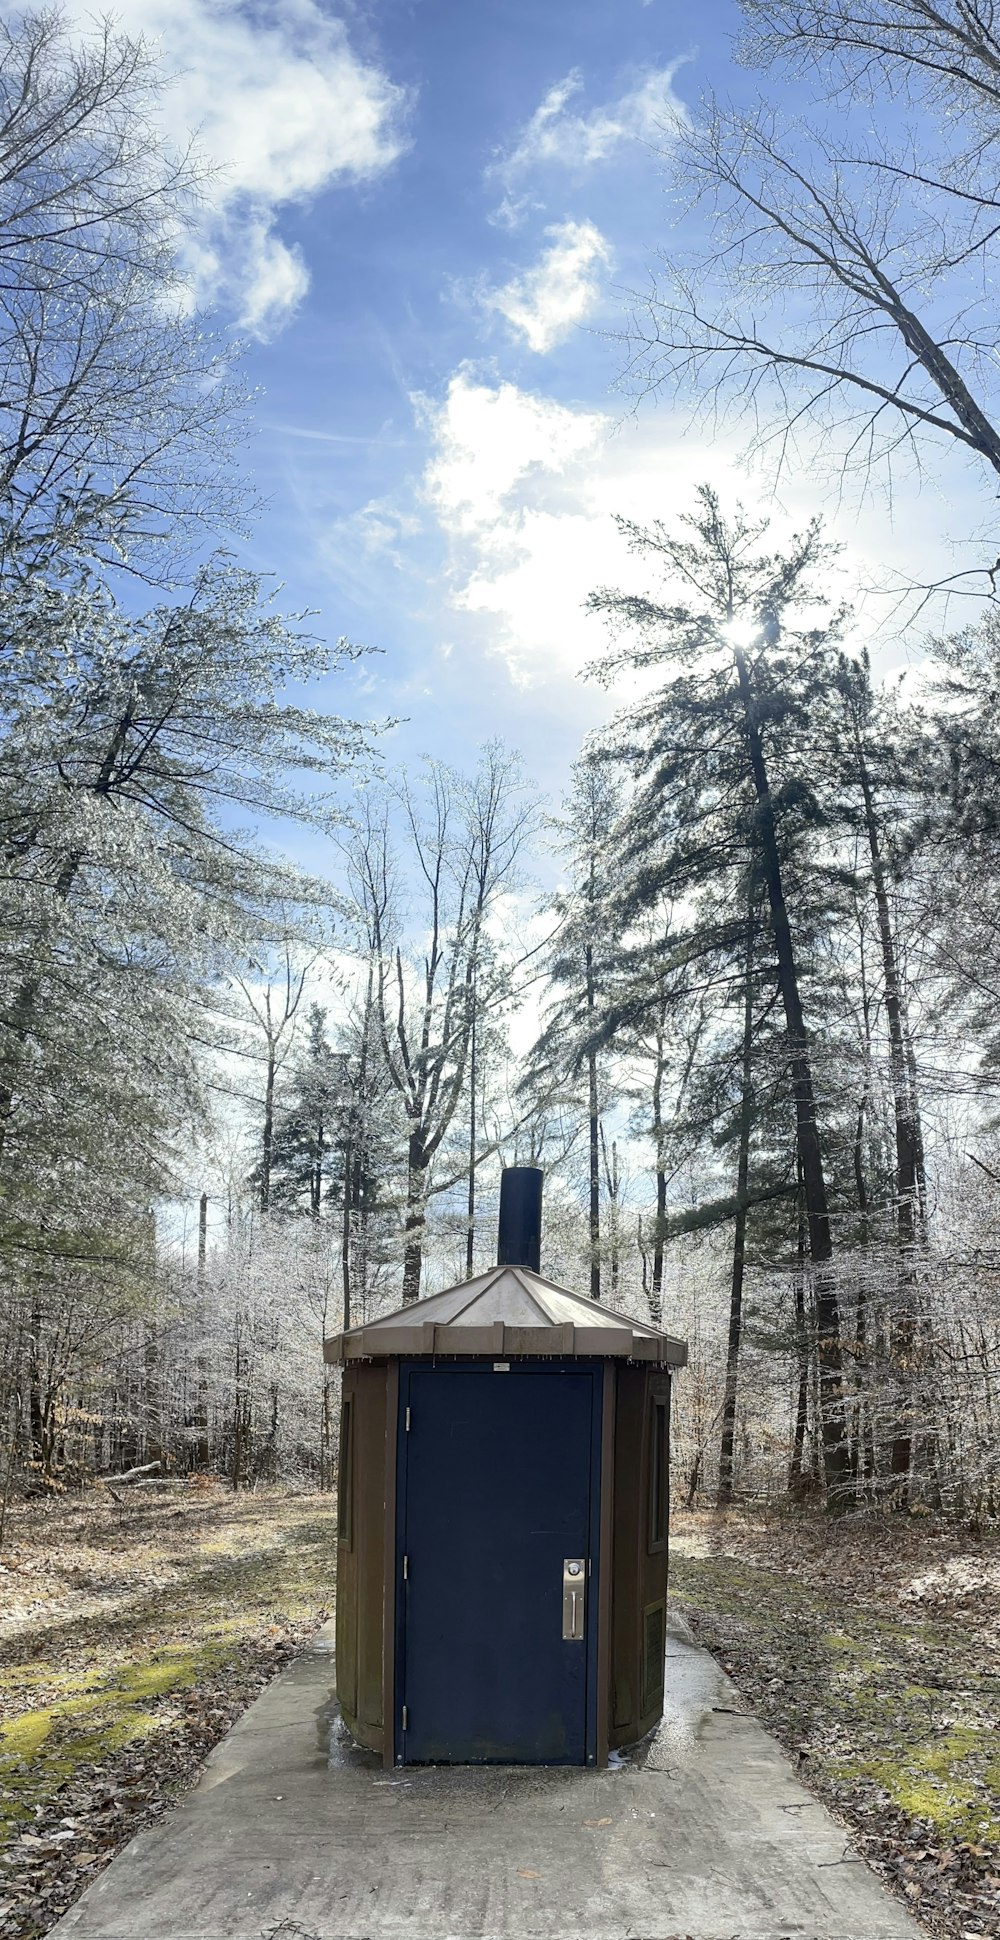 a small outhouse in the middle of a wooded area